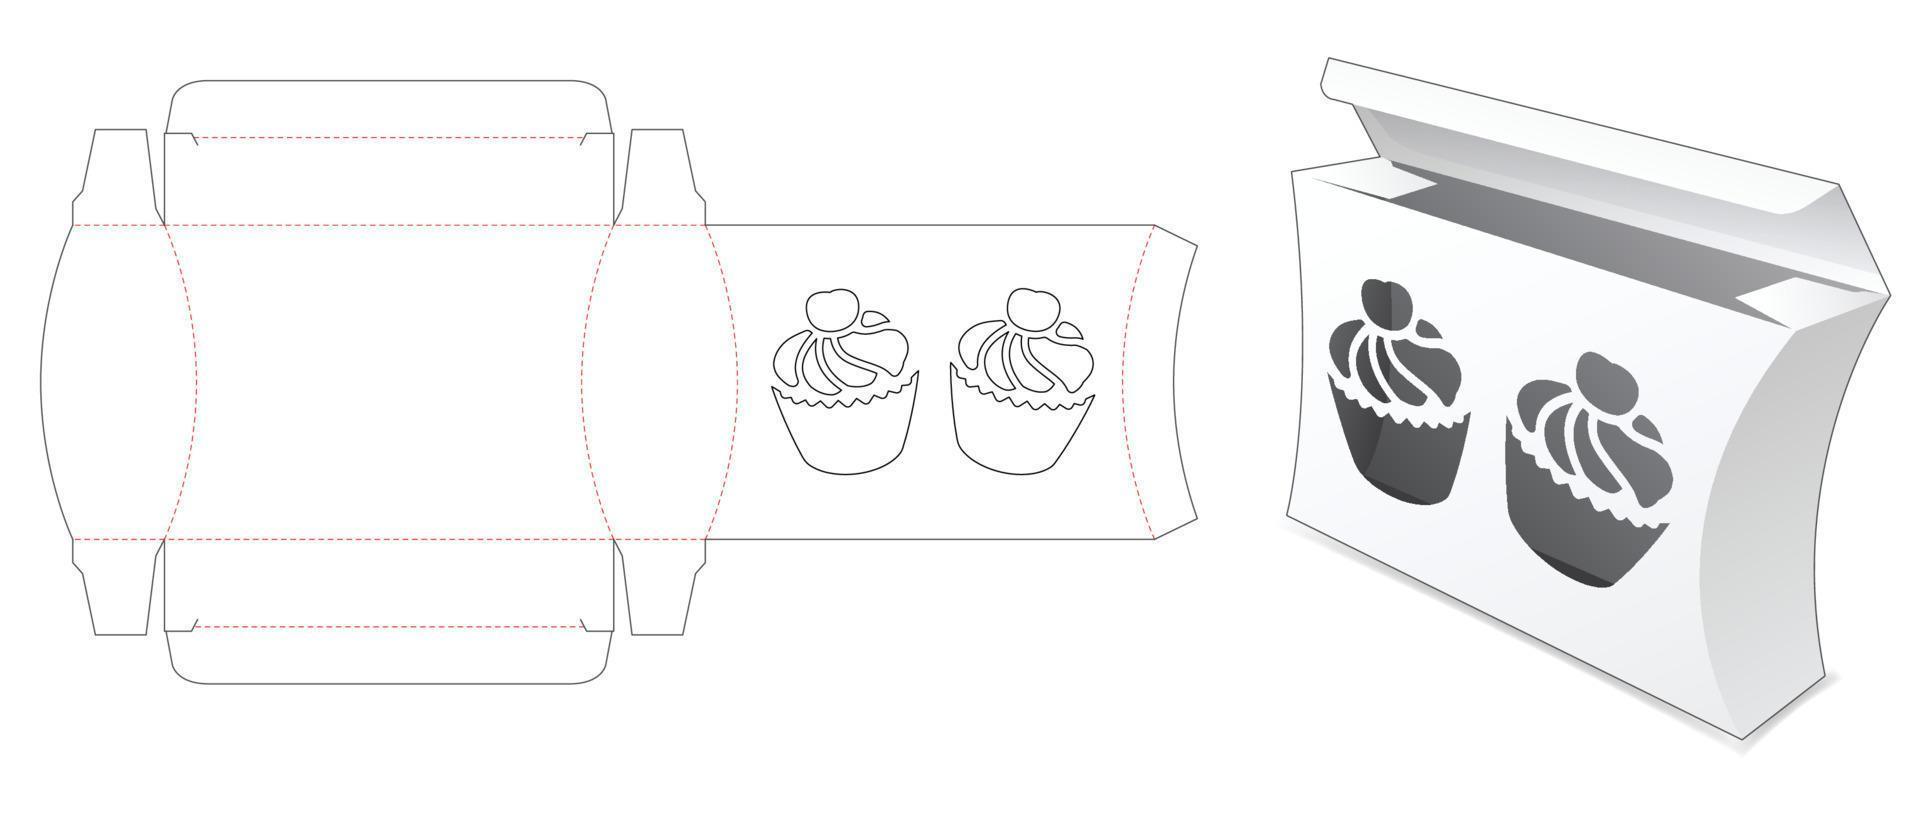 Curved box with cup cake windows die cut template vector